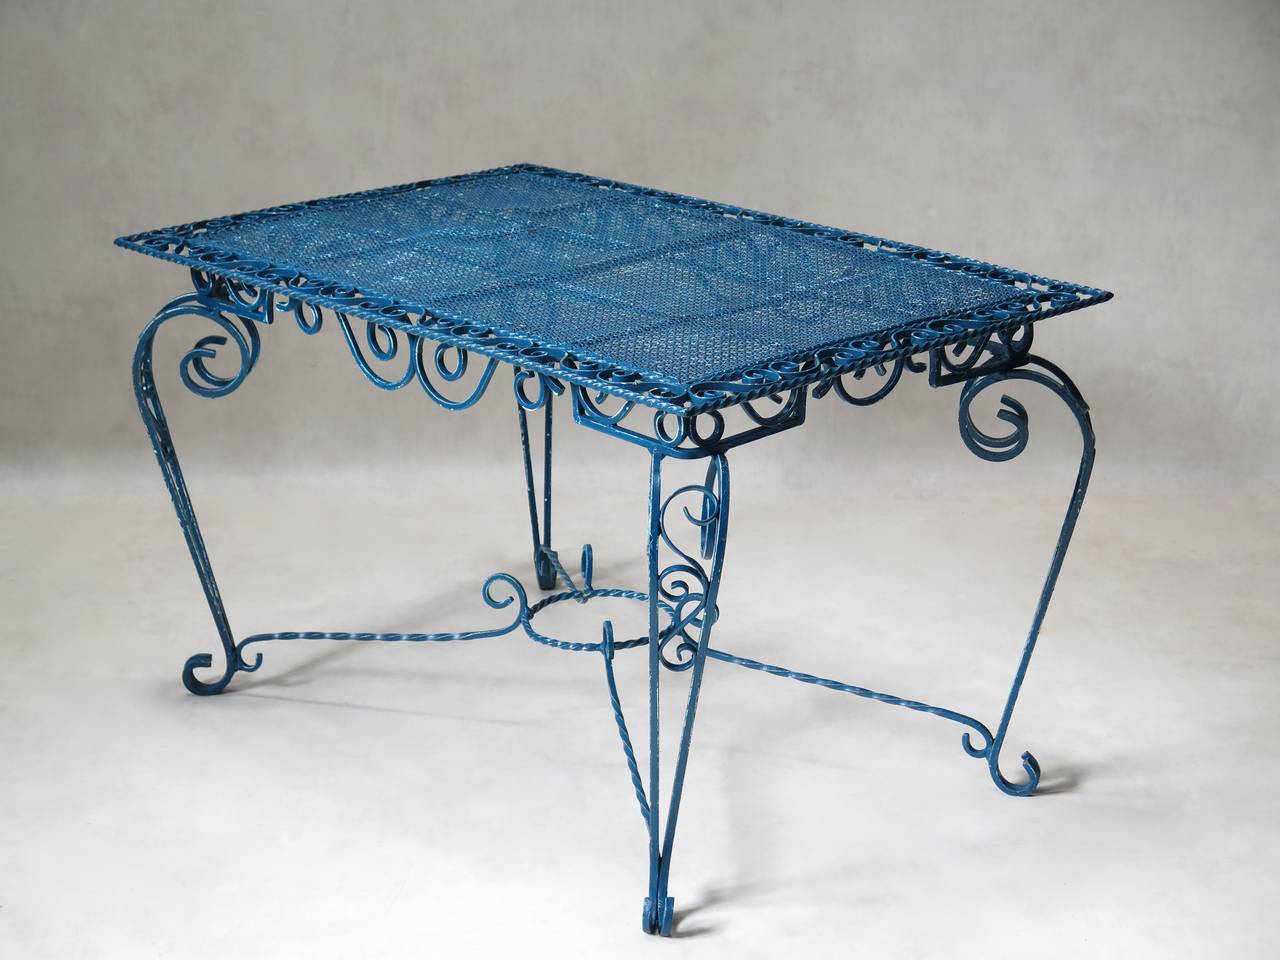 Outdoor dining set comprised of a rectangular table and four armchairs of solid wrought iron with elaborate scrolling curlicue motifs.

The tabletop as well as the chair backs and seats are made of cloverleaf-patterned sheet metal, in very good